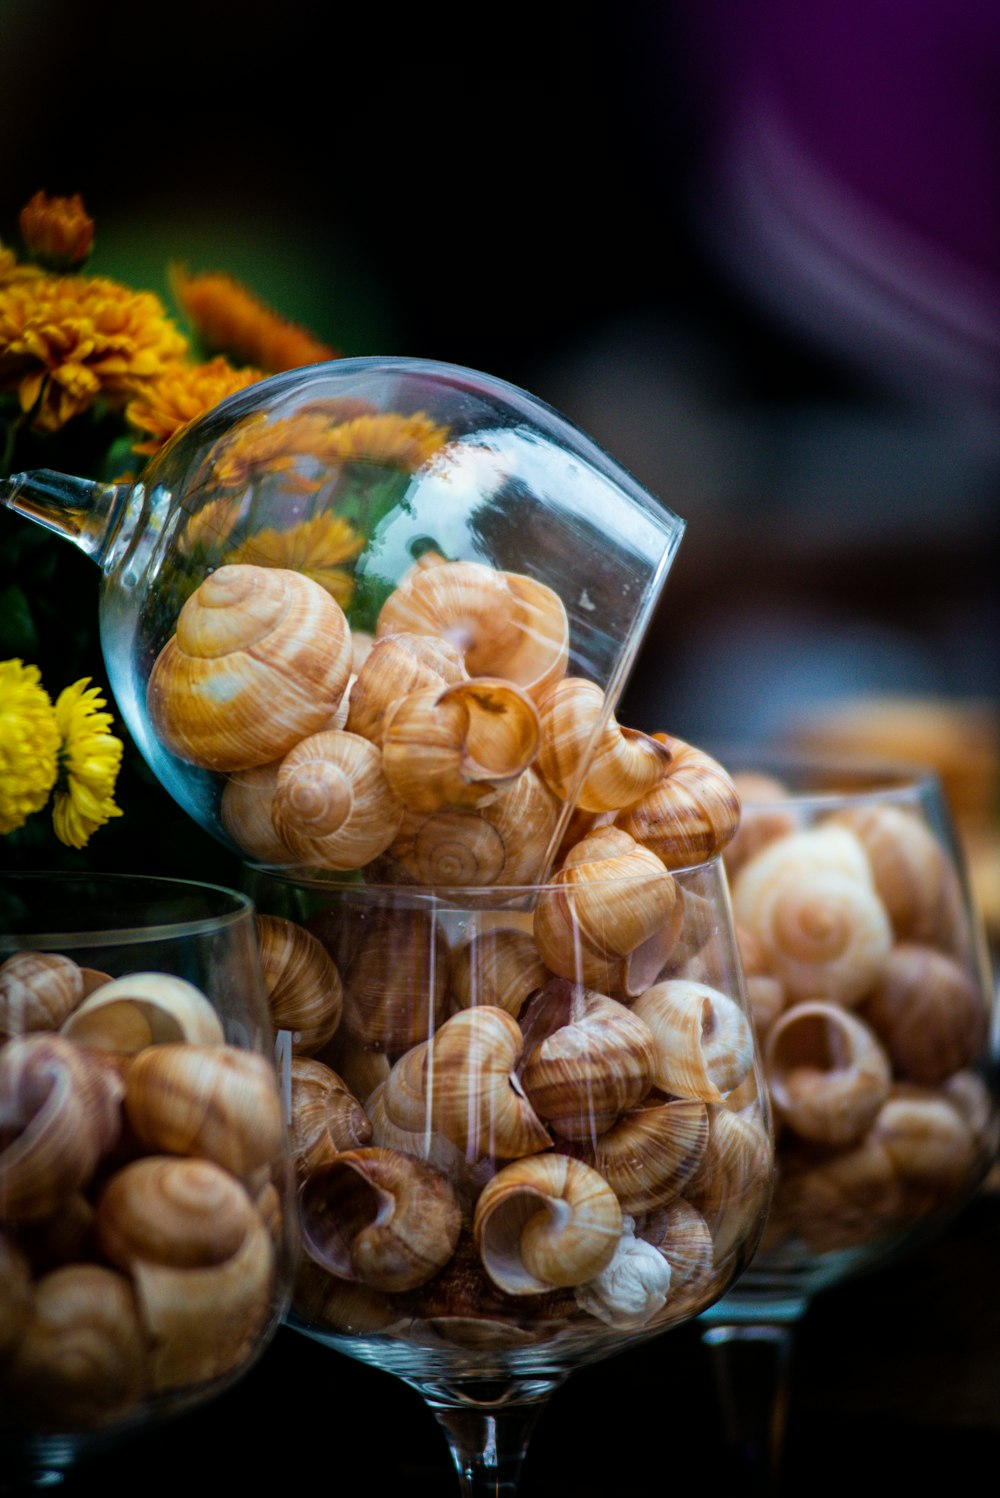 a glass bowl filled with nuts next to a vase filled with flowers